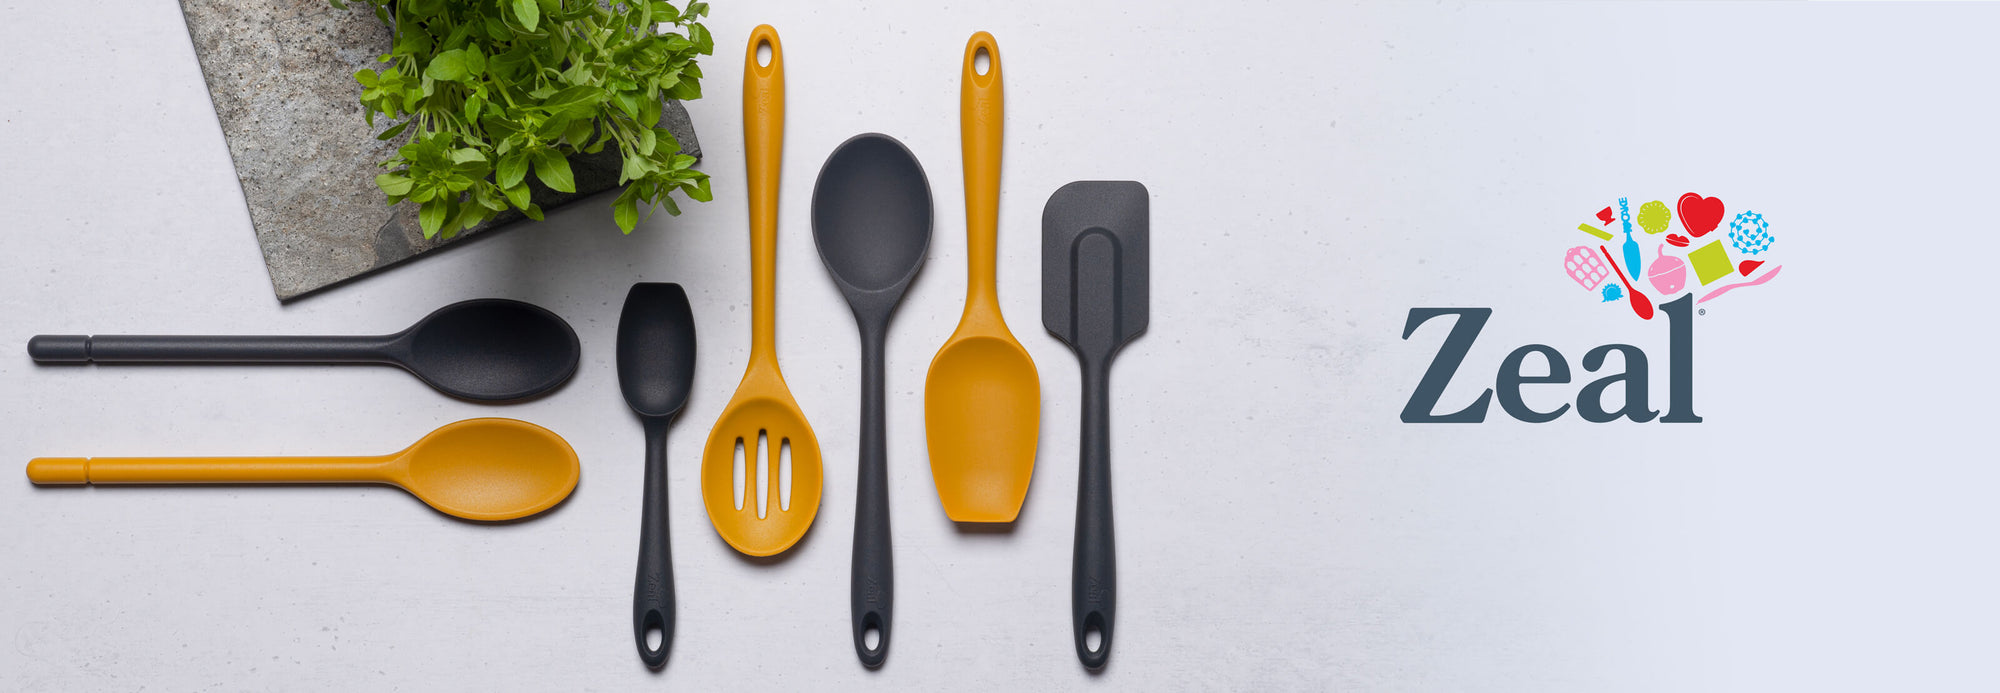 Everyday kitchen tools, fabrics, food prep and accessories by Zeal.